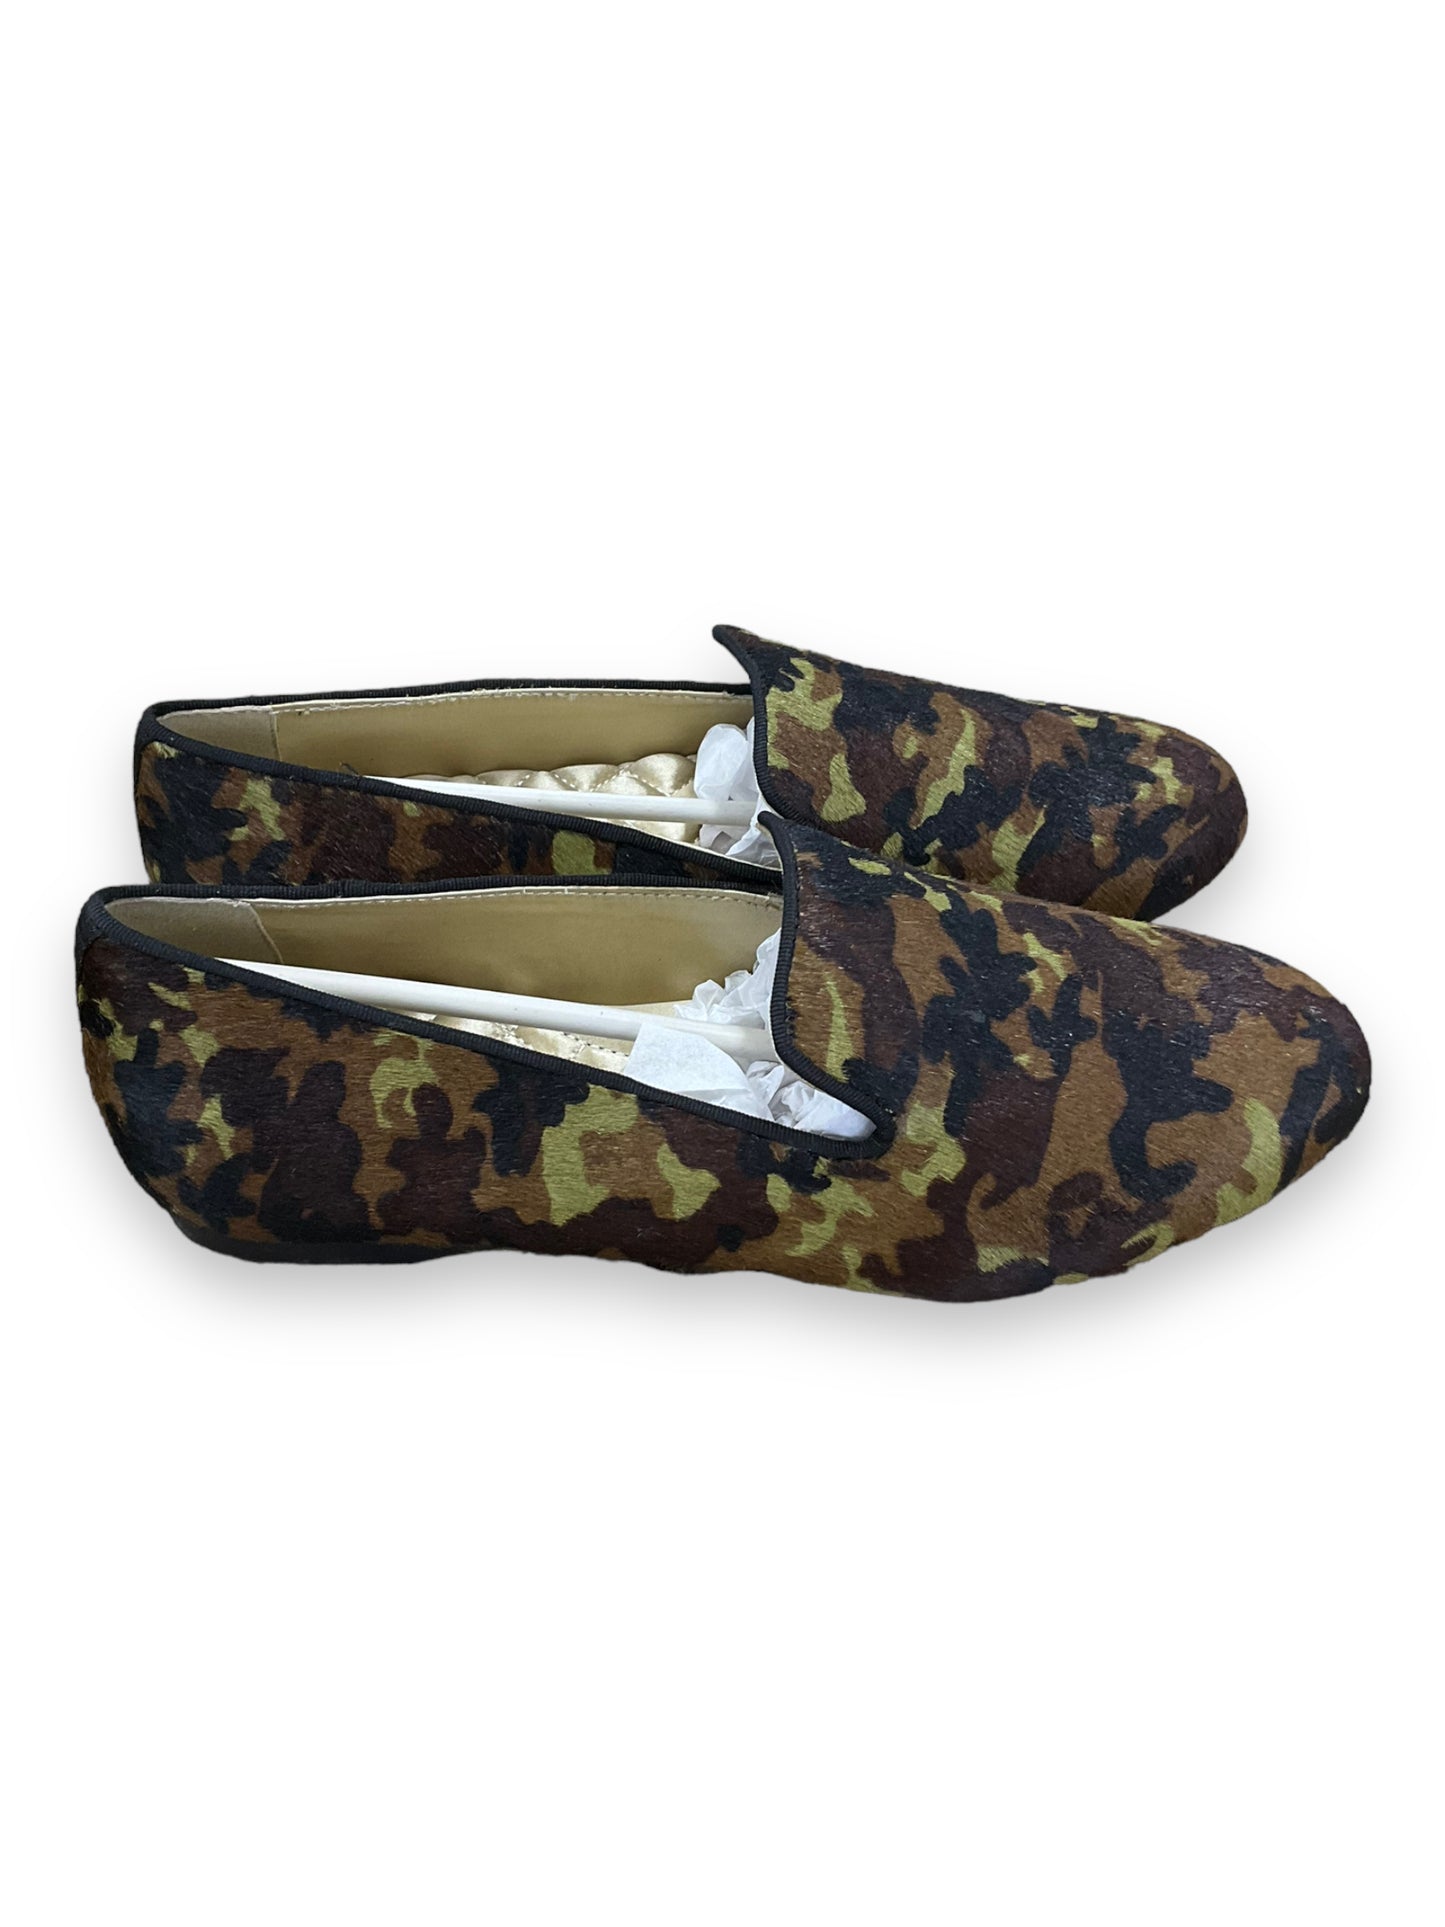 Shoes Flats Loafer Oxford By Cmc  Size: 6.5